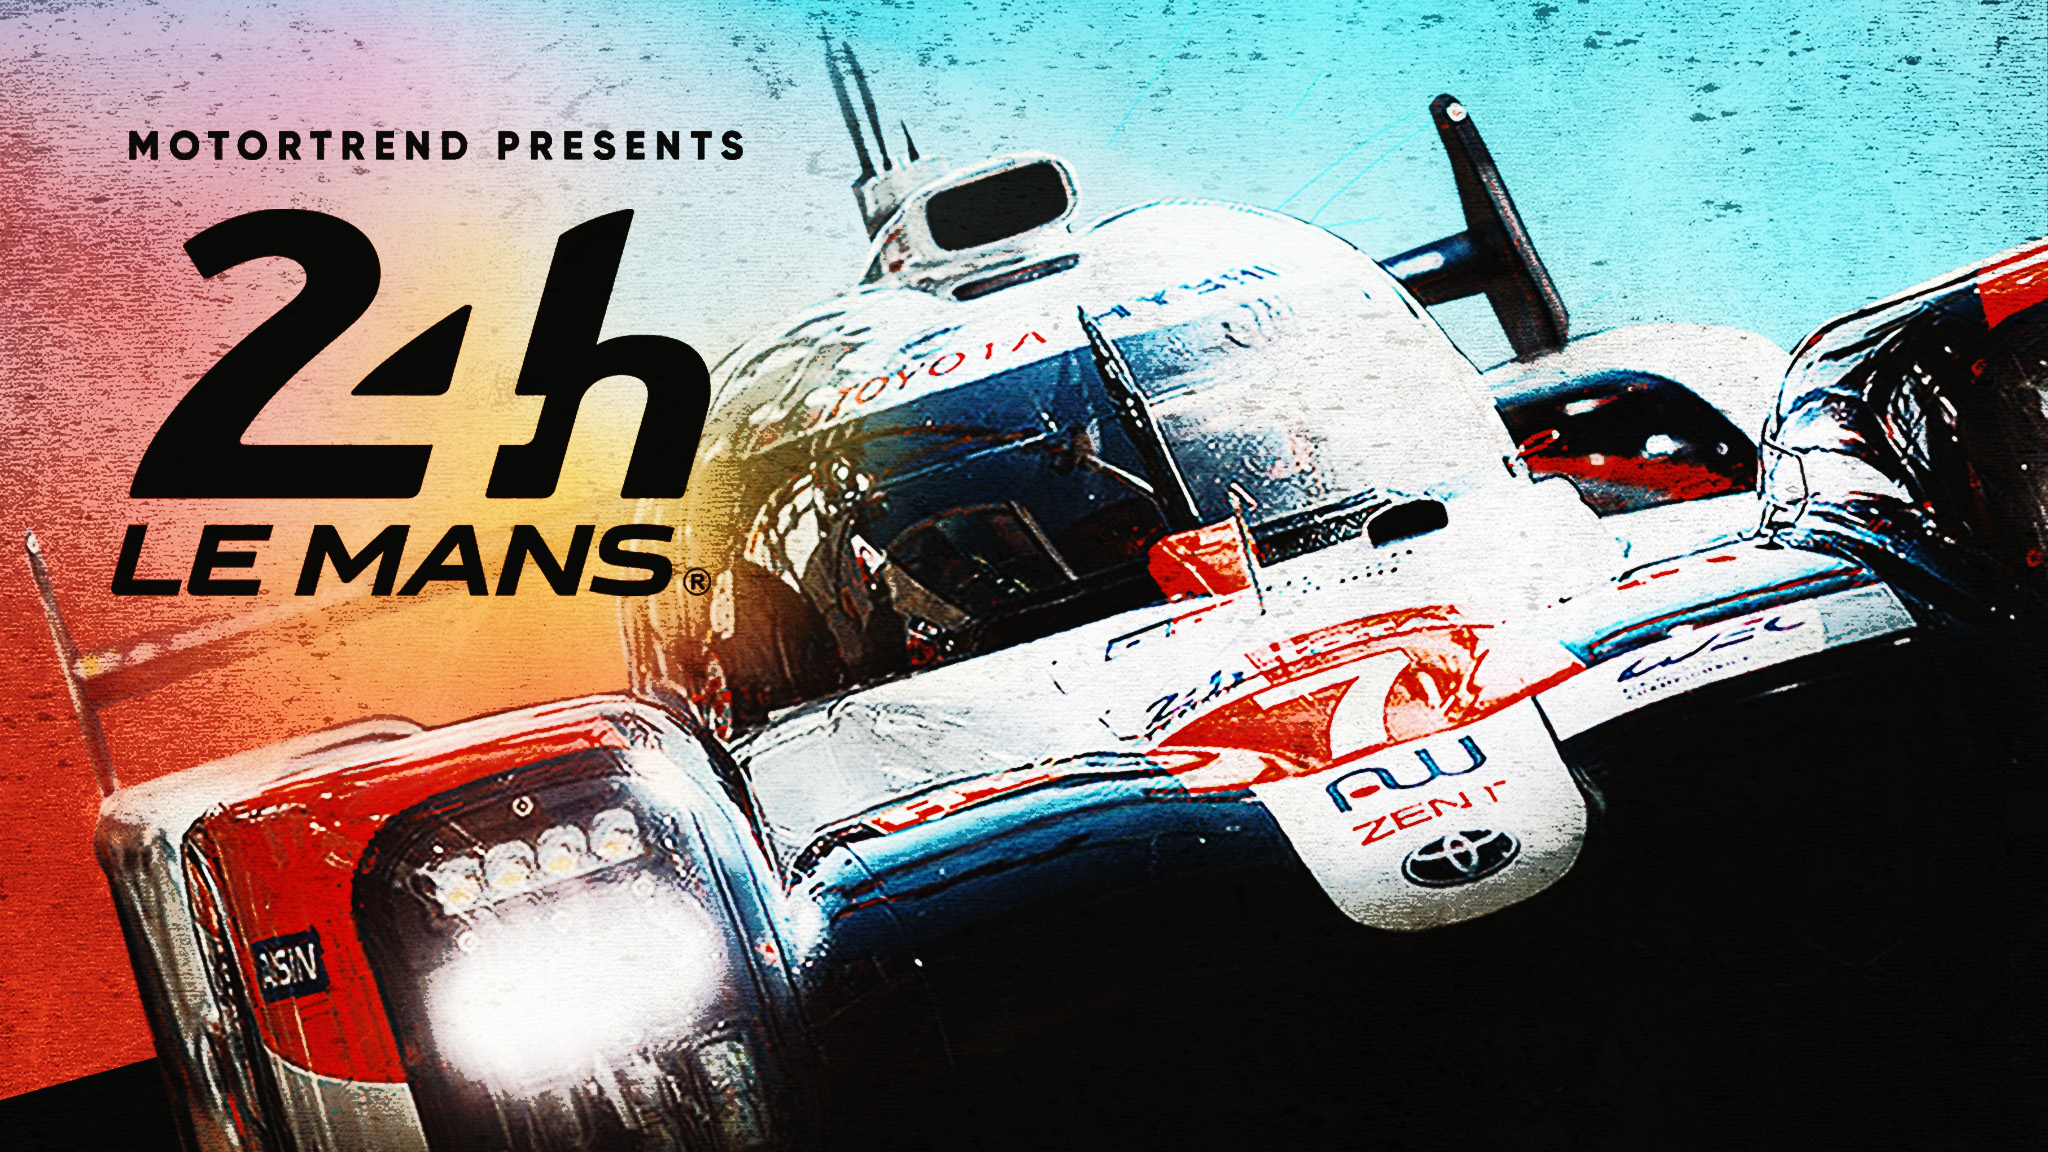 90TH Running of the Most Prestigious Automotive Race, the 24 Hours of